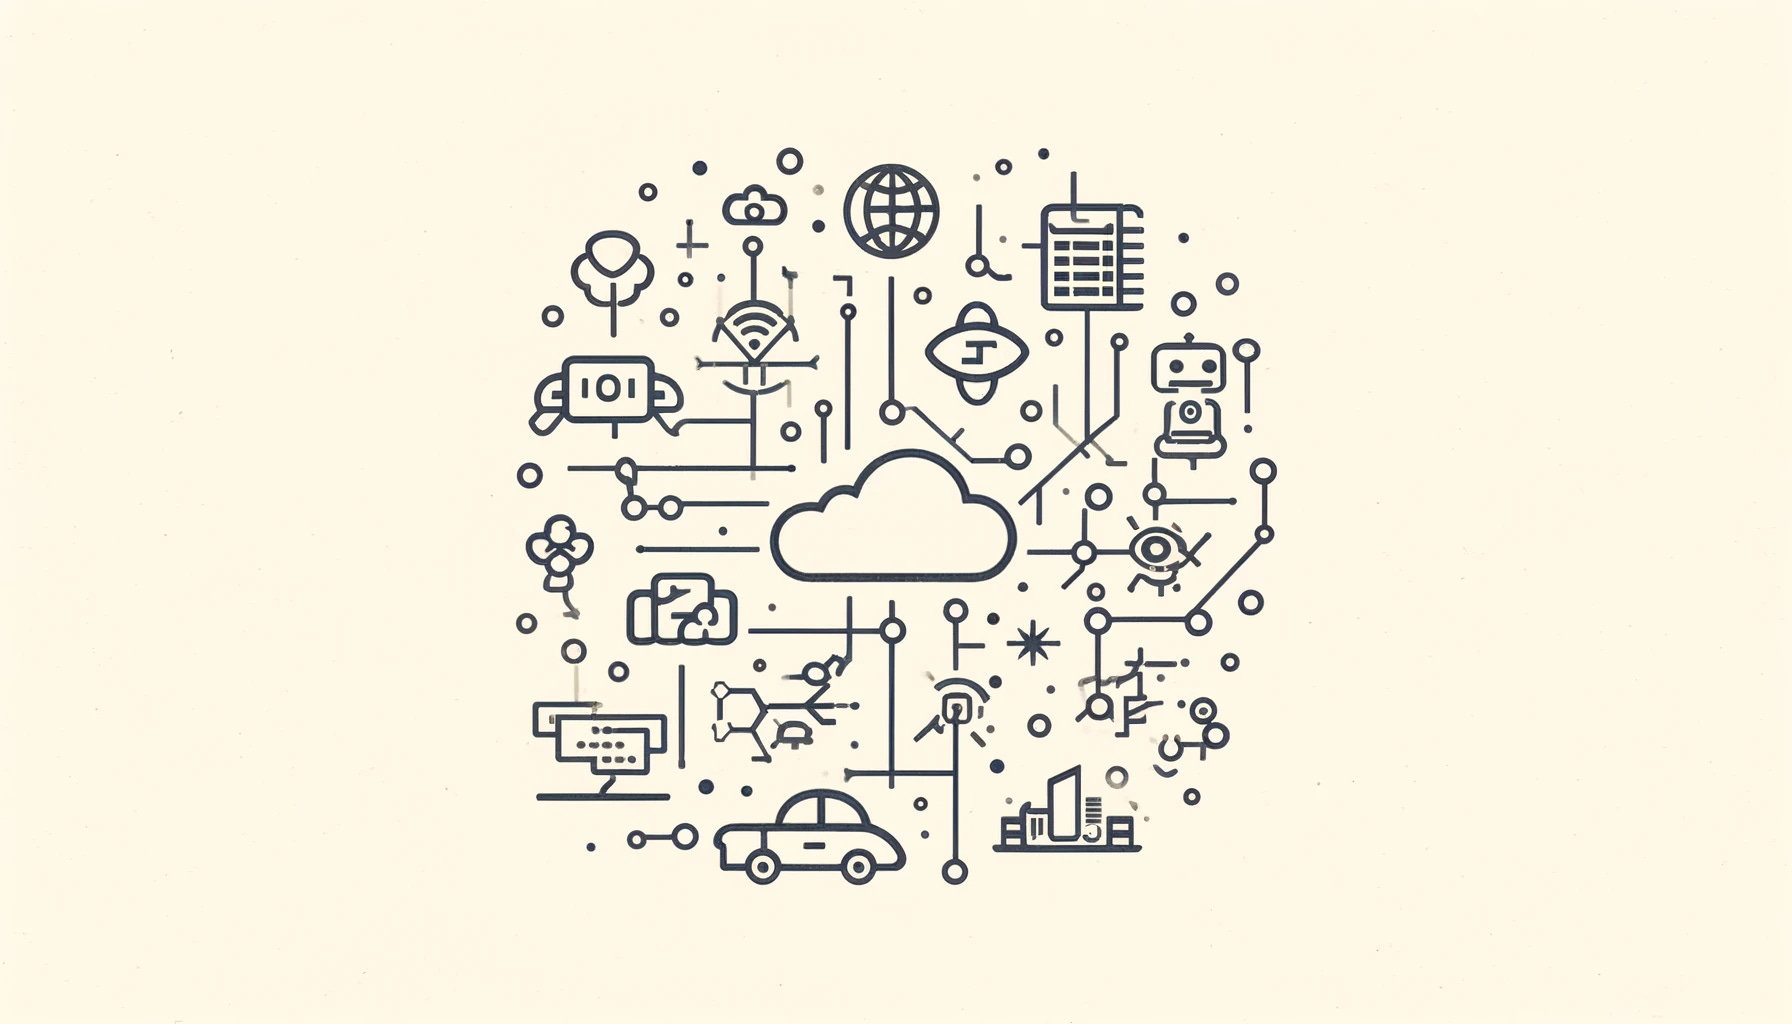 A minimalistic greyscale illustration on an off-white background depicting the impact of AI across various sectors. The image features simple, abstract icons representing different industries: a cloud for software, a car for autonomous vehicles, a robot for robotics, and symbols for other sectors like healthcare, finance, and retail. Each icon is interconnected with thin lines, symbolizing the pervasive influence of AI. The design has a clean, modern aesthetic with thin lines and simple shapes.